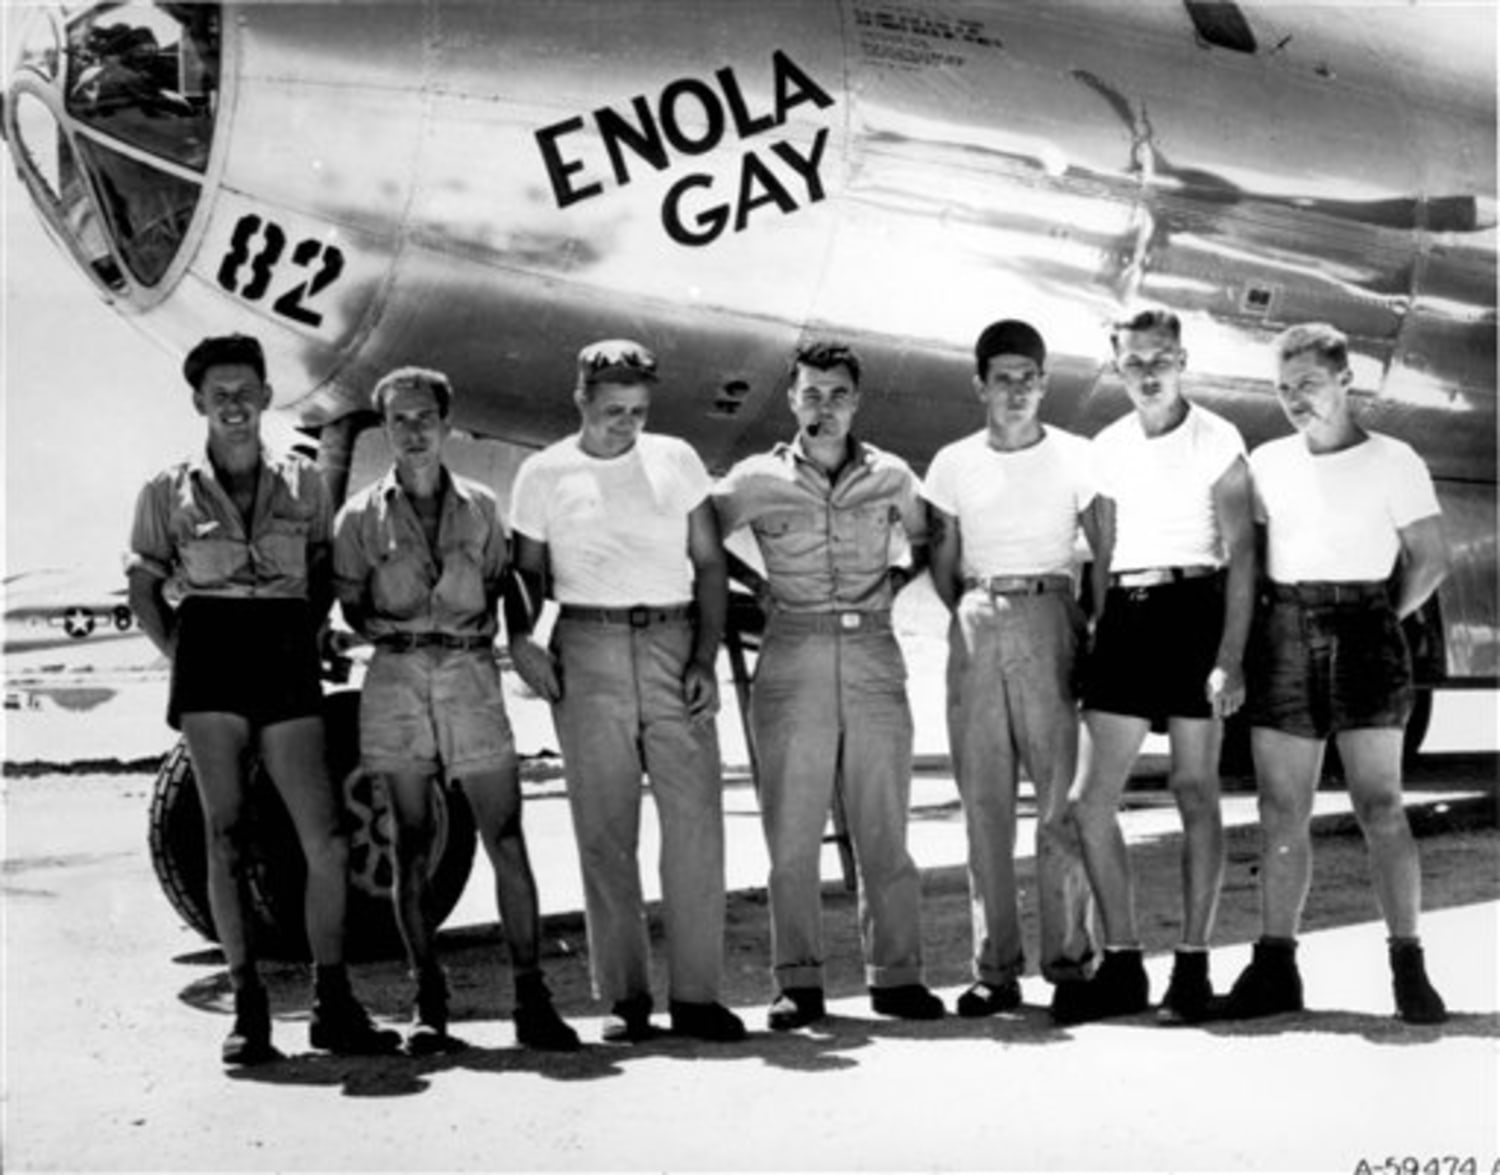 where did the enola gay fly out of